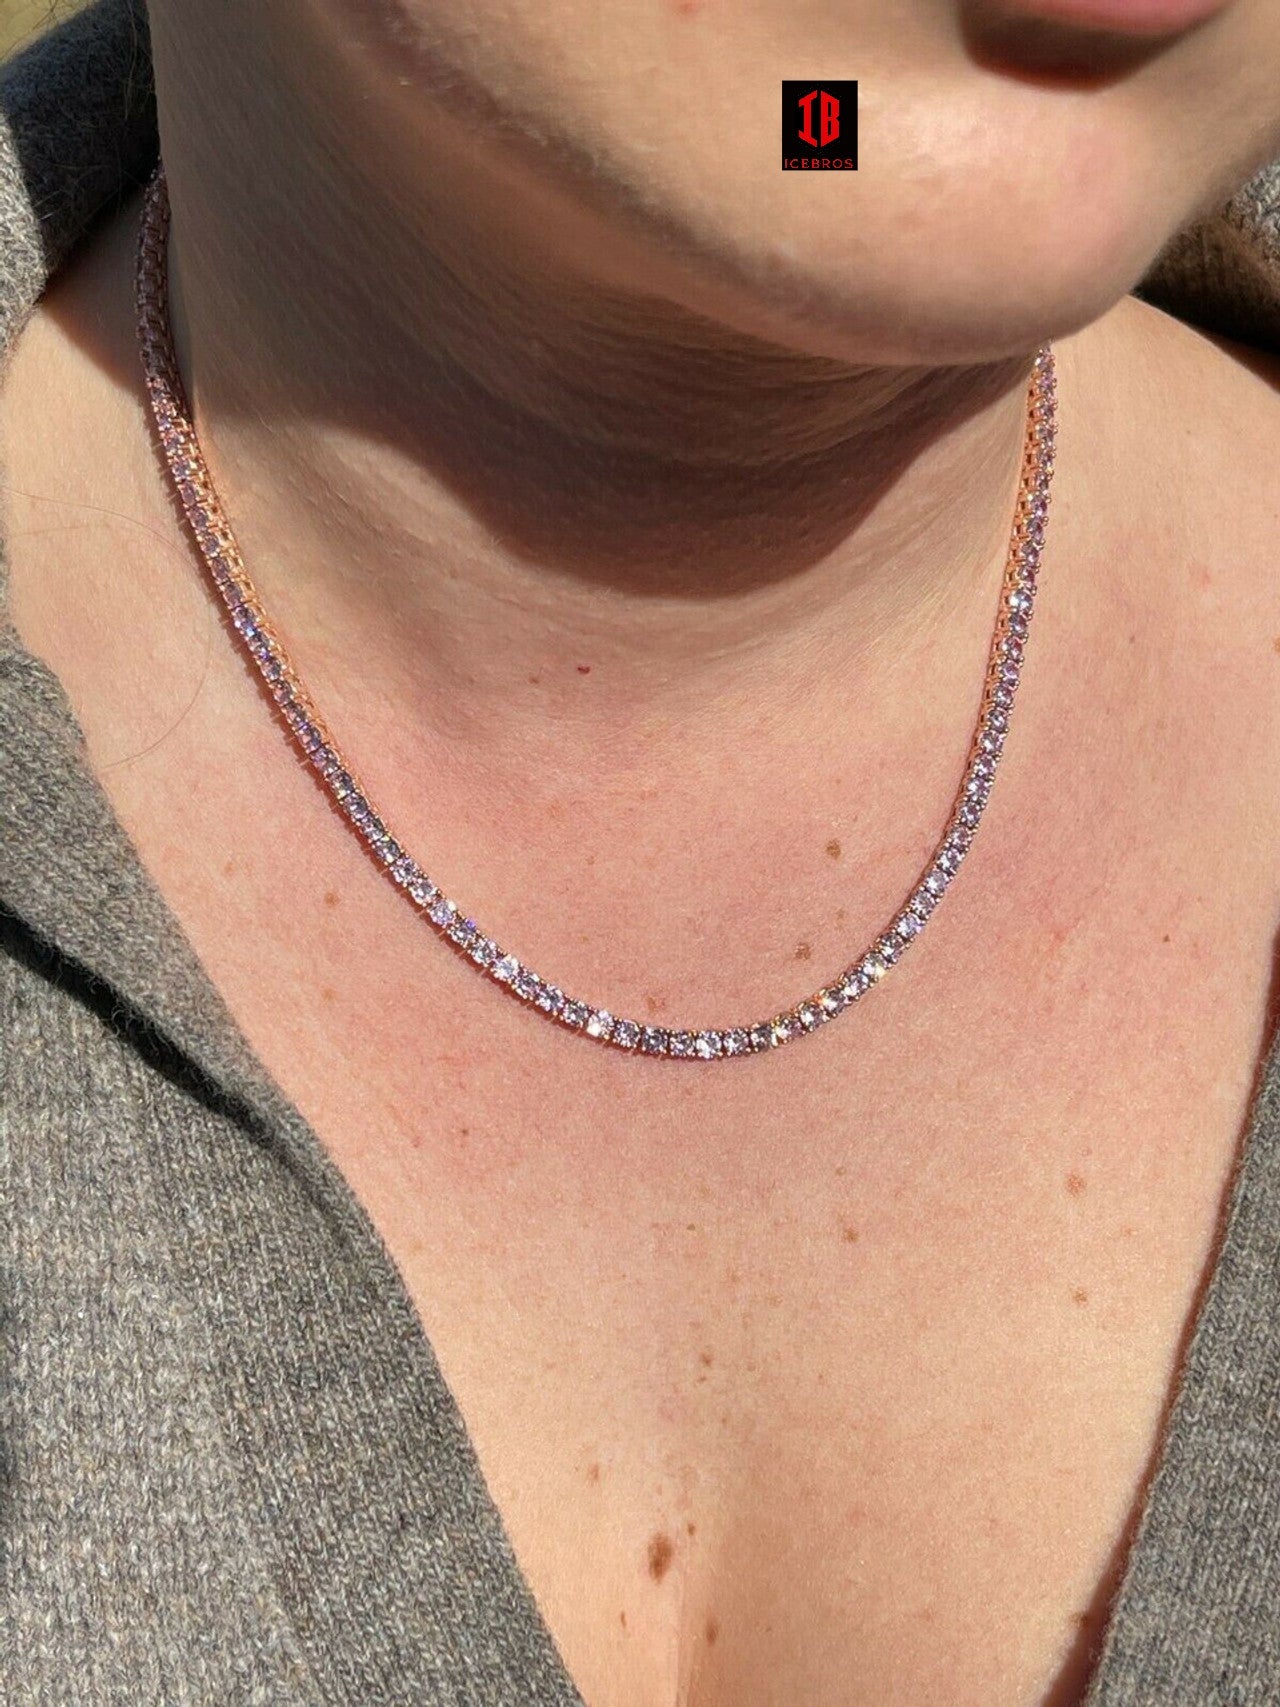 Solitaire Tennis Chain Necklace With Rose Gold Finish, Pink Lab Diamond  Tennis Necklaces, 16 And 18 1 Row Zirconia Diamond Tennis Necklace  Bling291q From Mate9, $26.4 | DHgate.Com